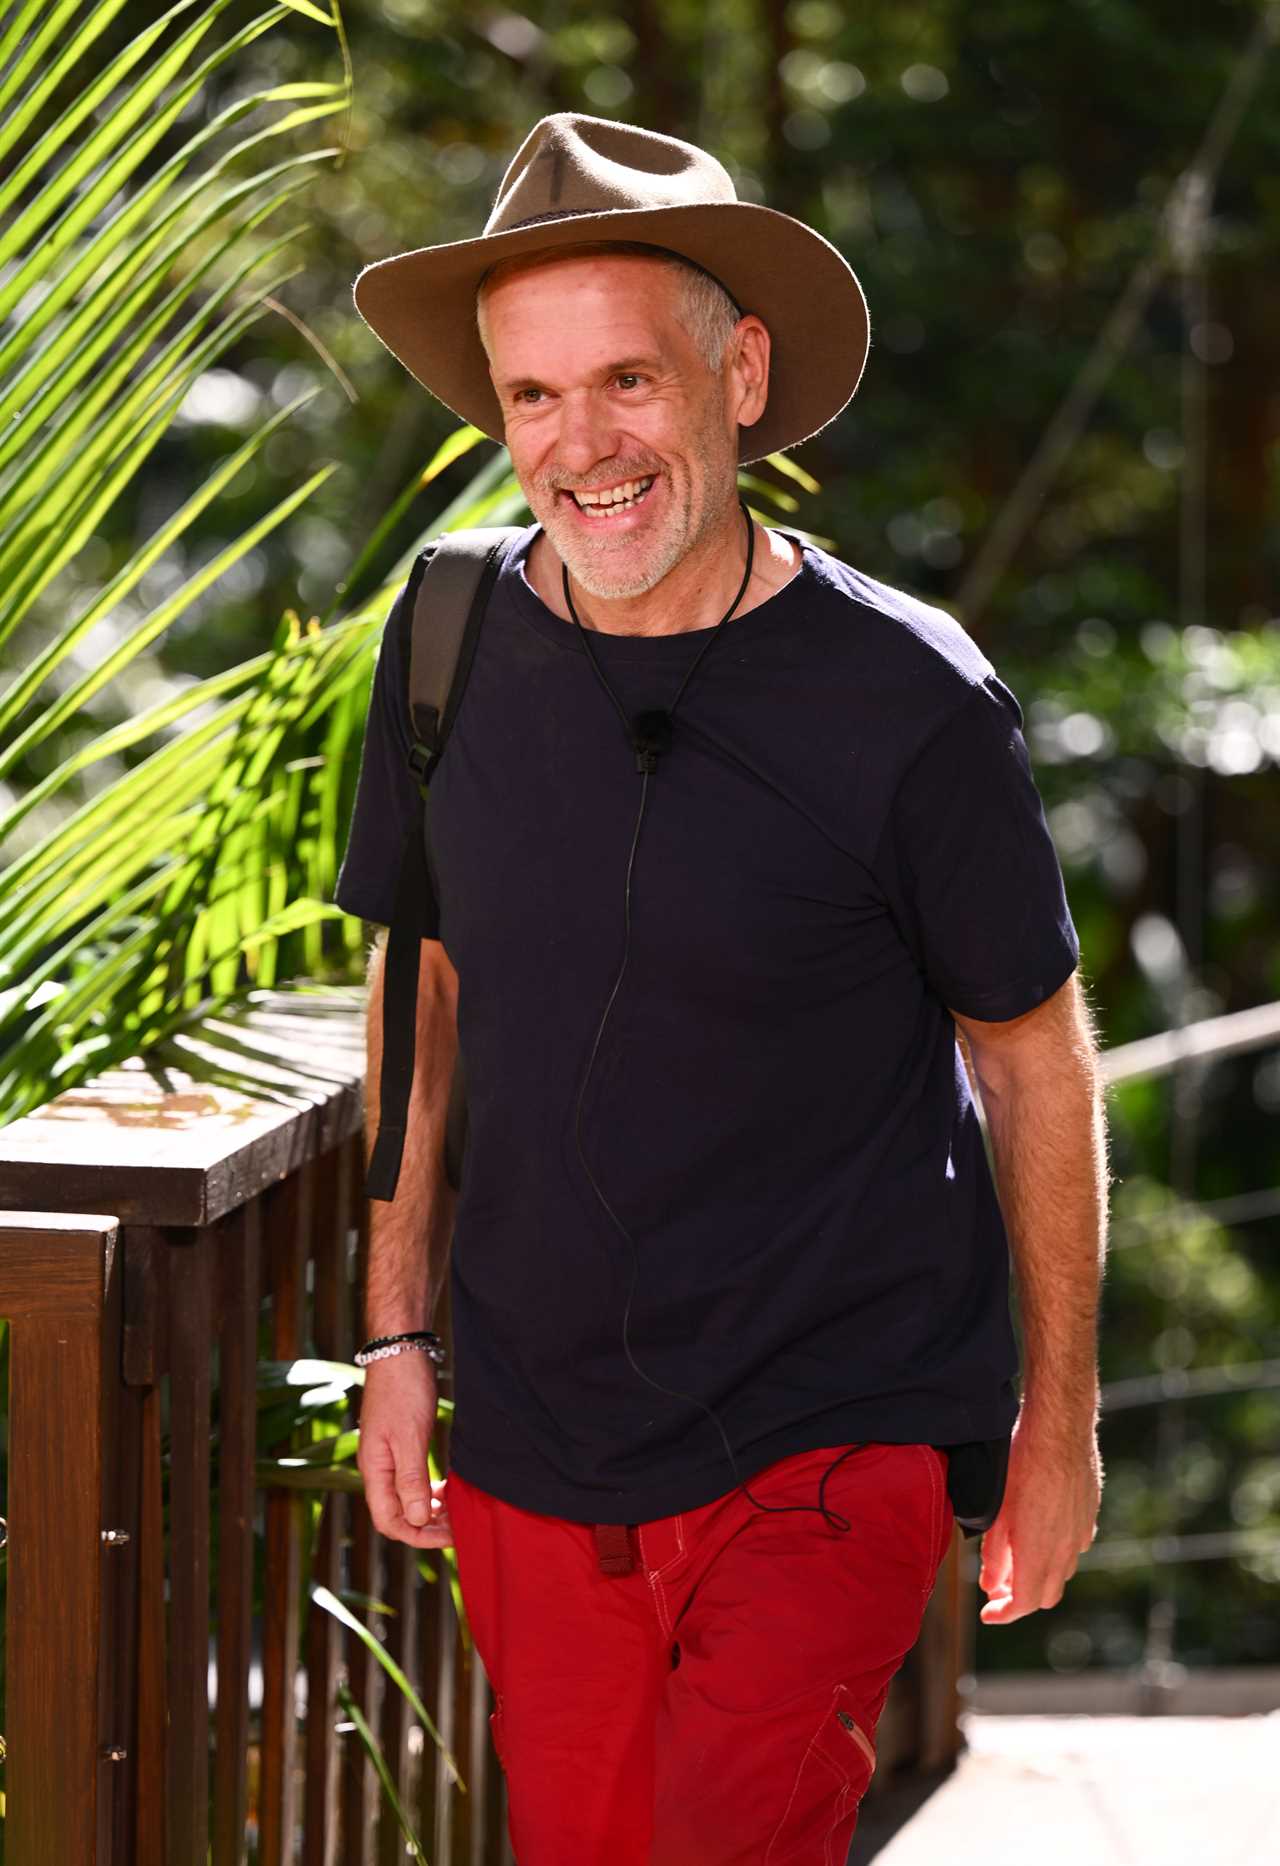 I’m A Celebrity moved from usual slot as ITV makes way for England’s World Cup match